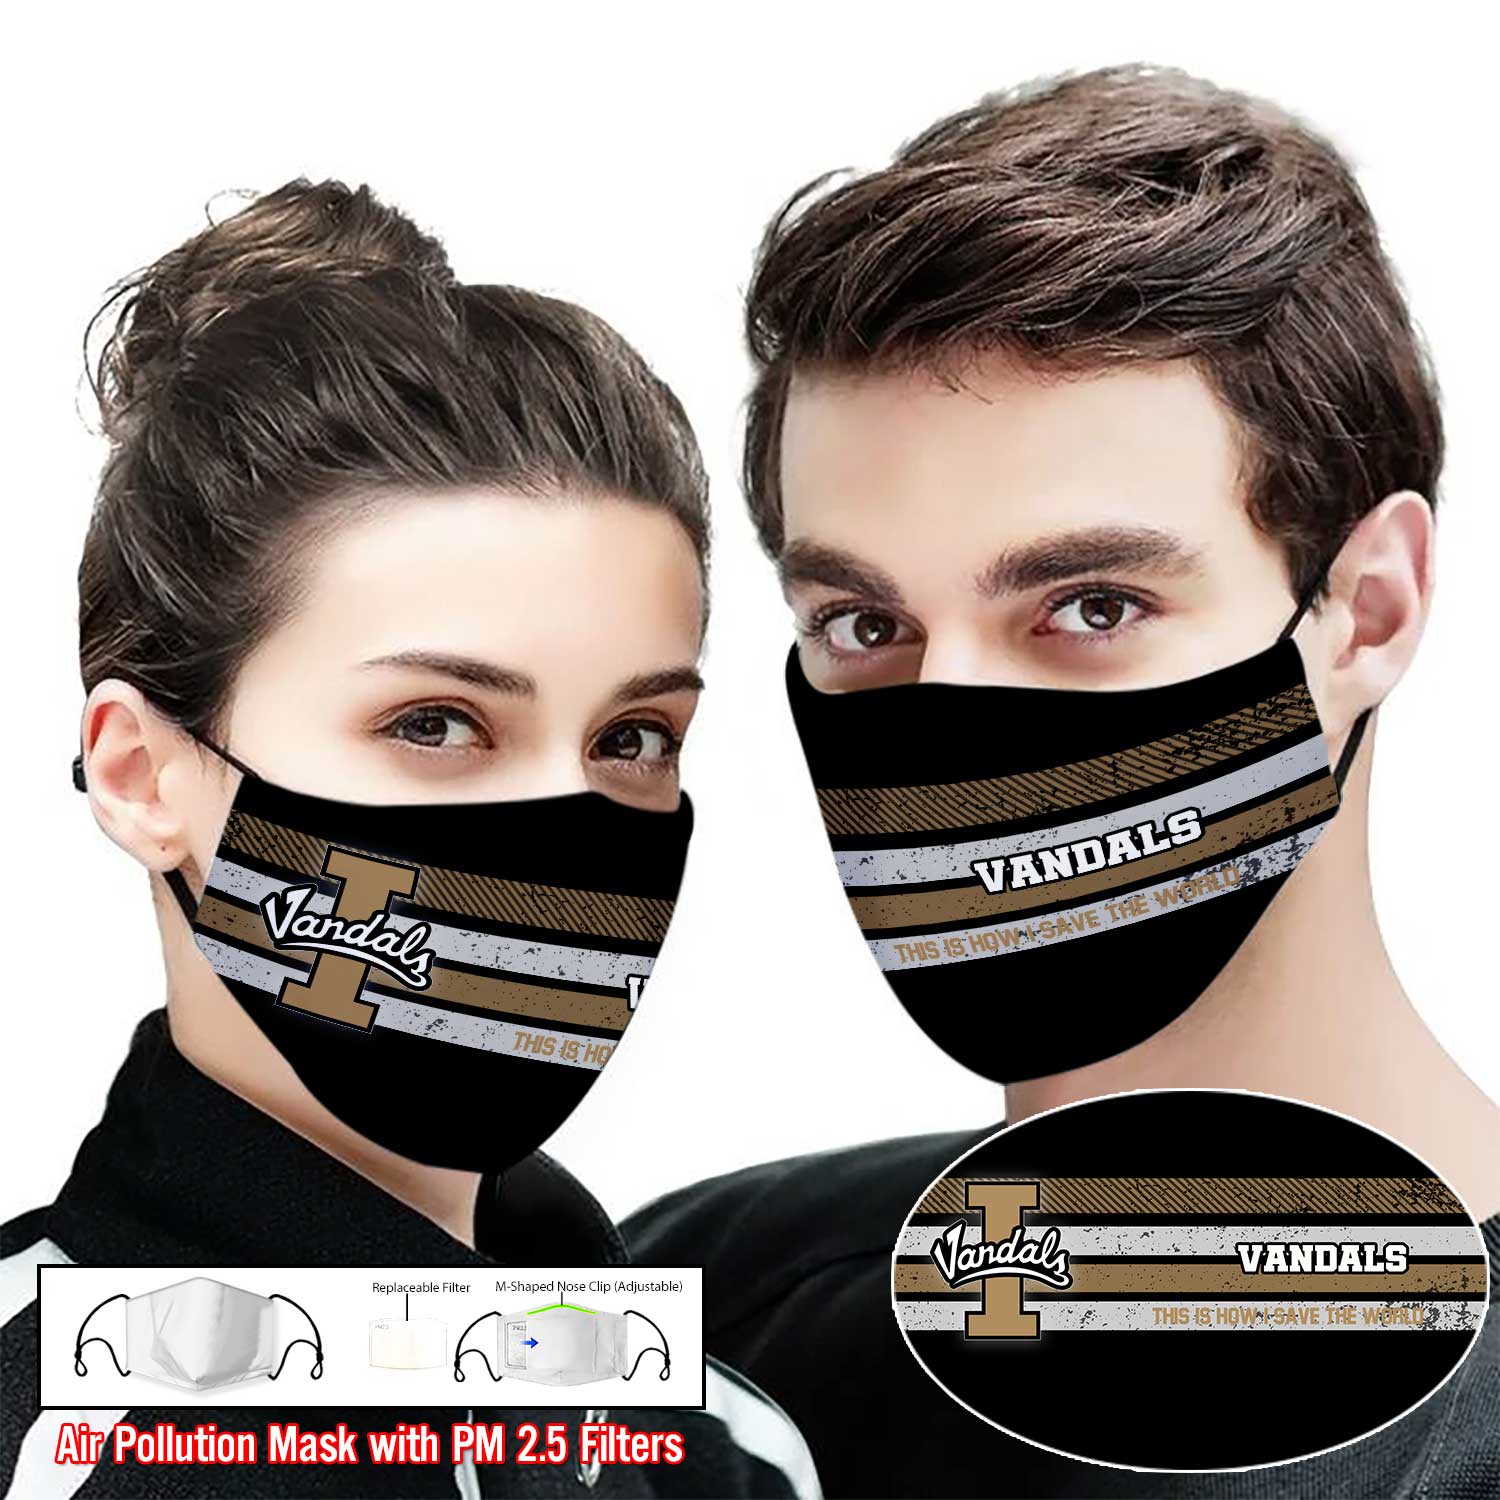 Idaho vandals this is how i save the world full printing face mask